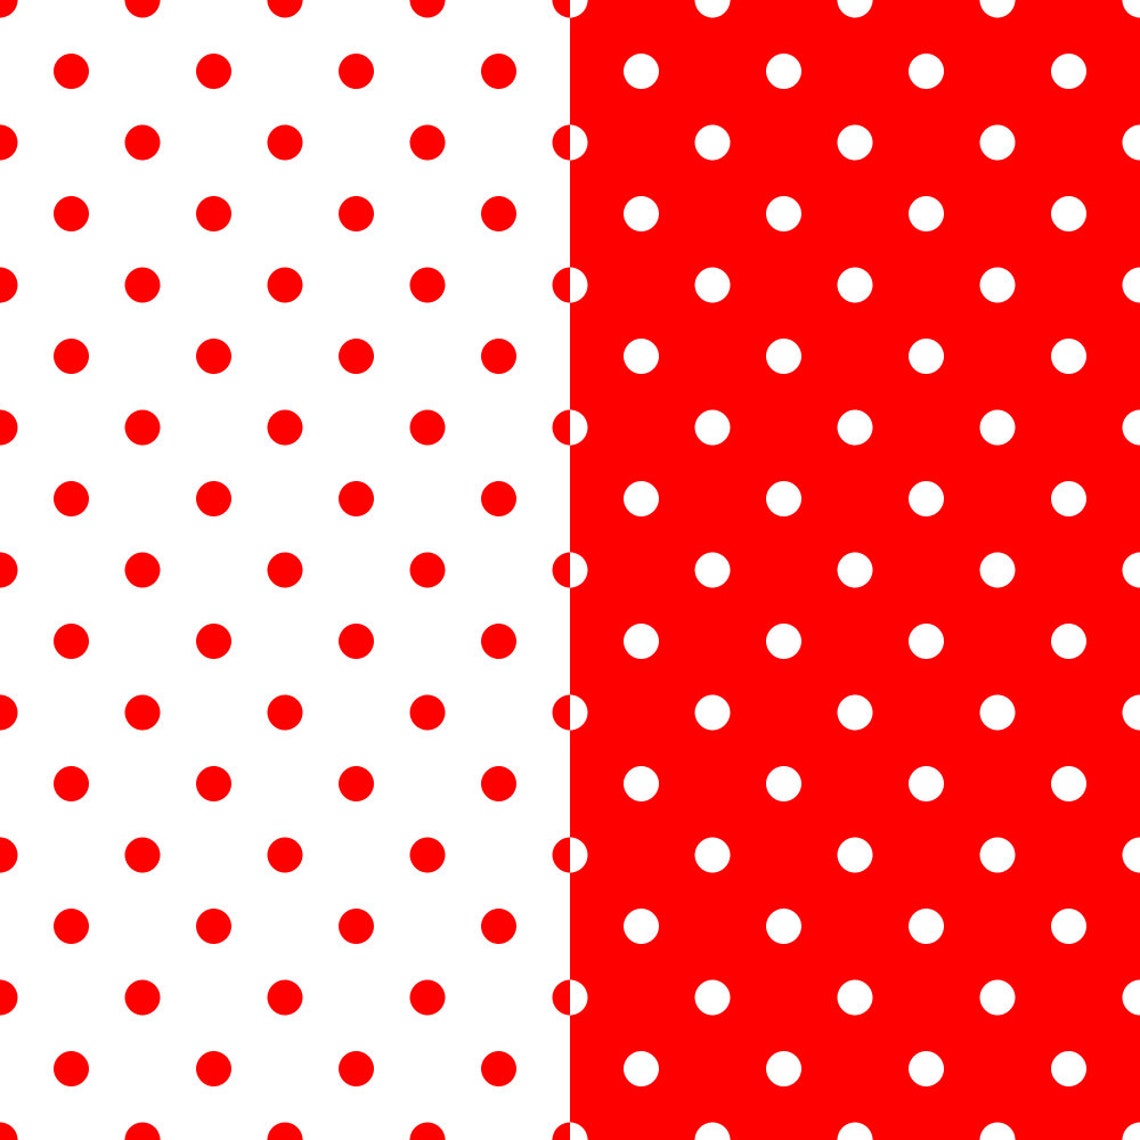 Red And White Polka Dots Digital Scrapbooking Paper Pack Etsy